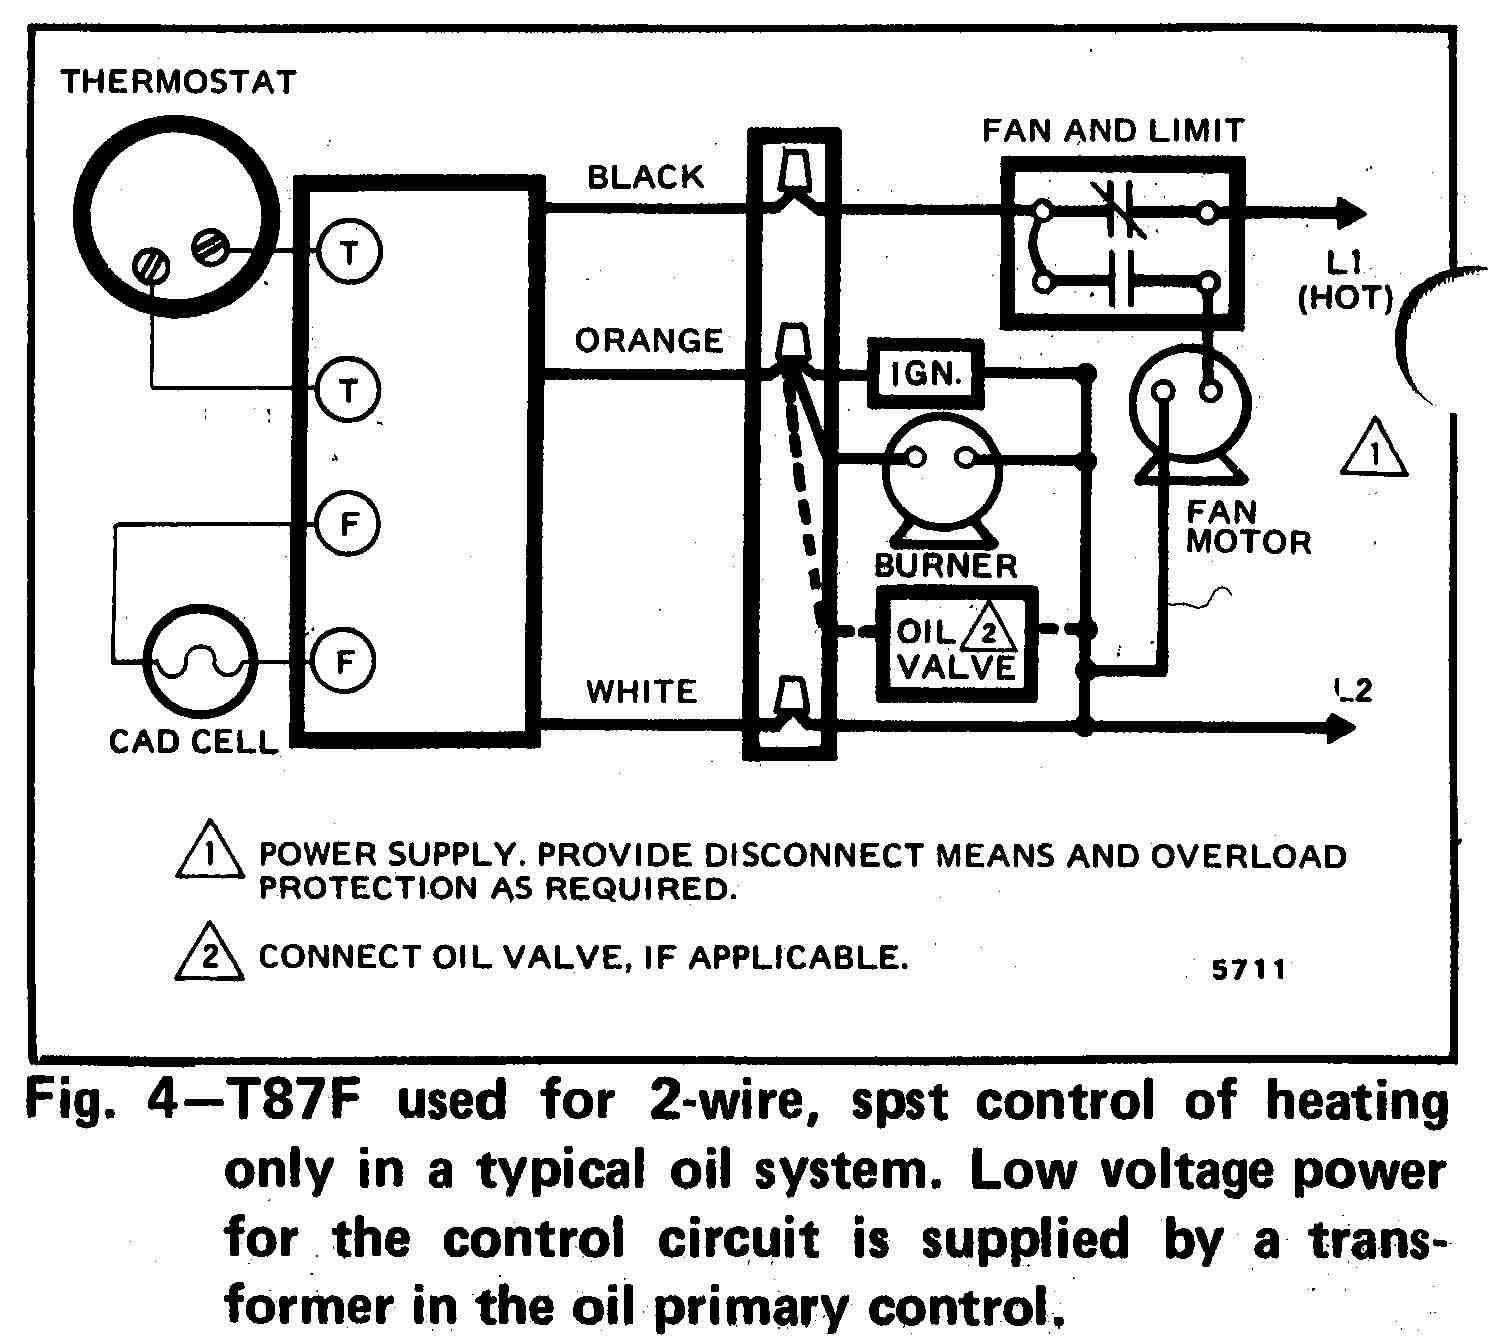 Room Thermostat Wiring Diagrams For Hvac Systems - Hvac Wiring Diagram